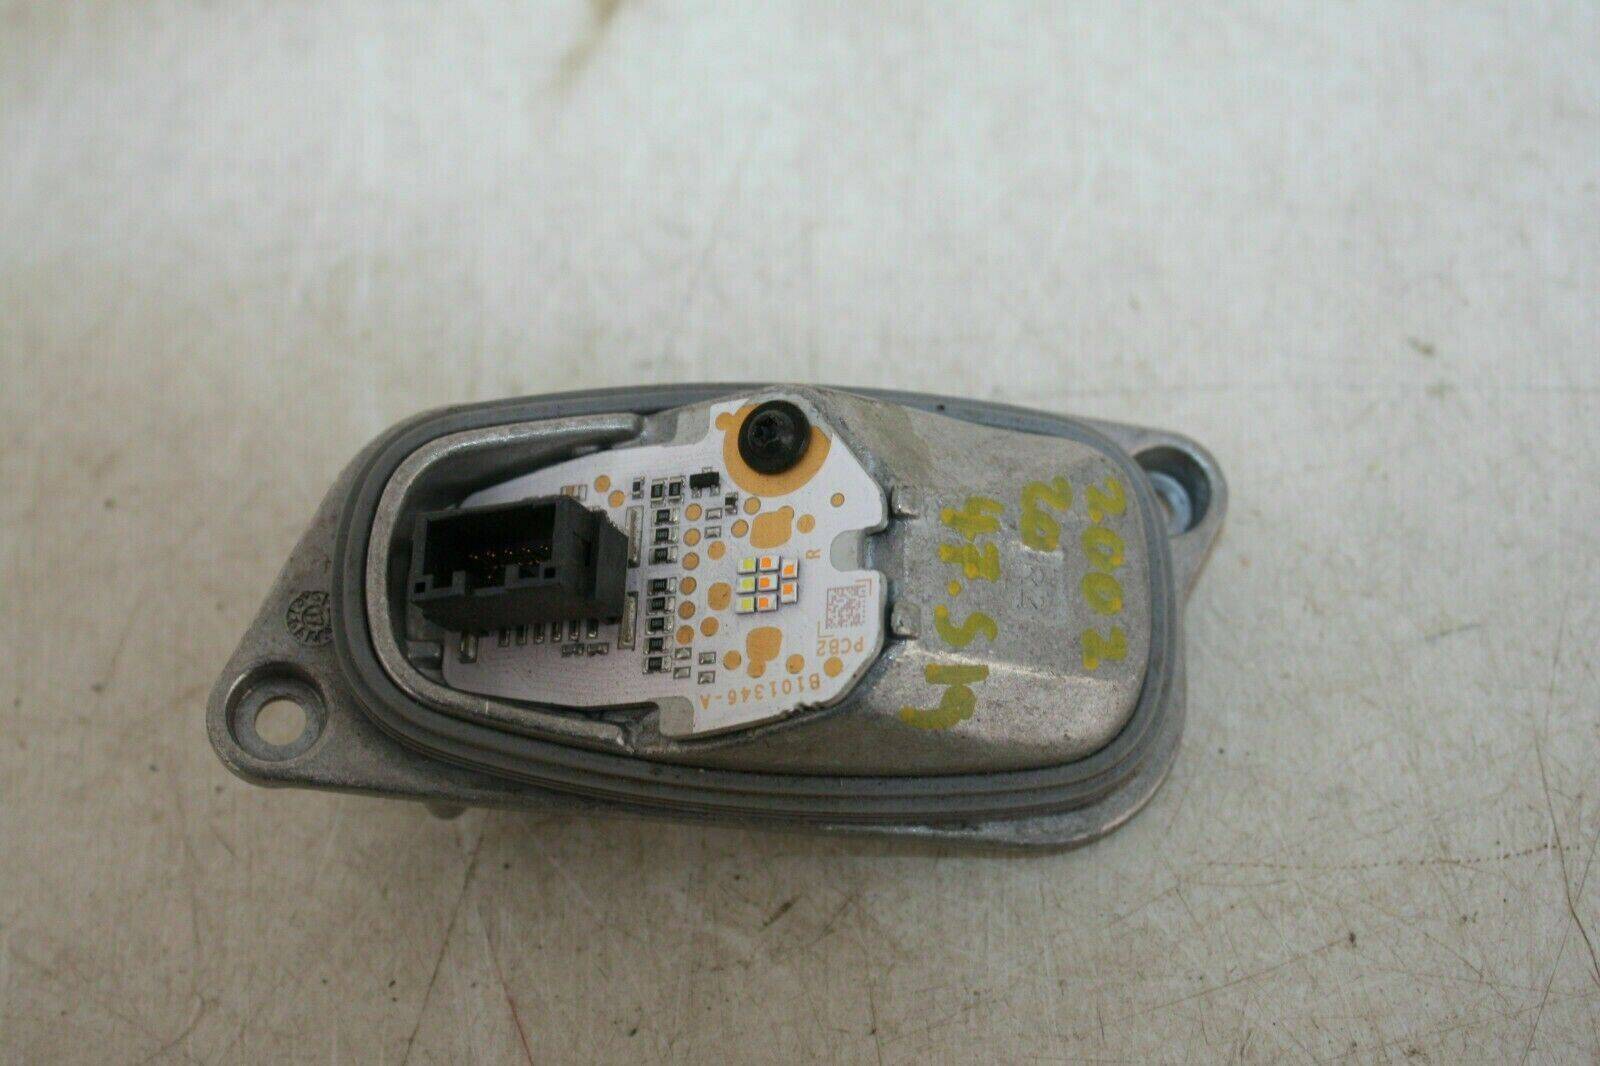 LAND-ROVER-DISCOVERY-DAYTIME-RUNNING-LIGHT-LED-DIODE-BULB-2017-ON-B101346-A-175407718894-4